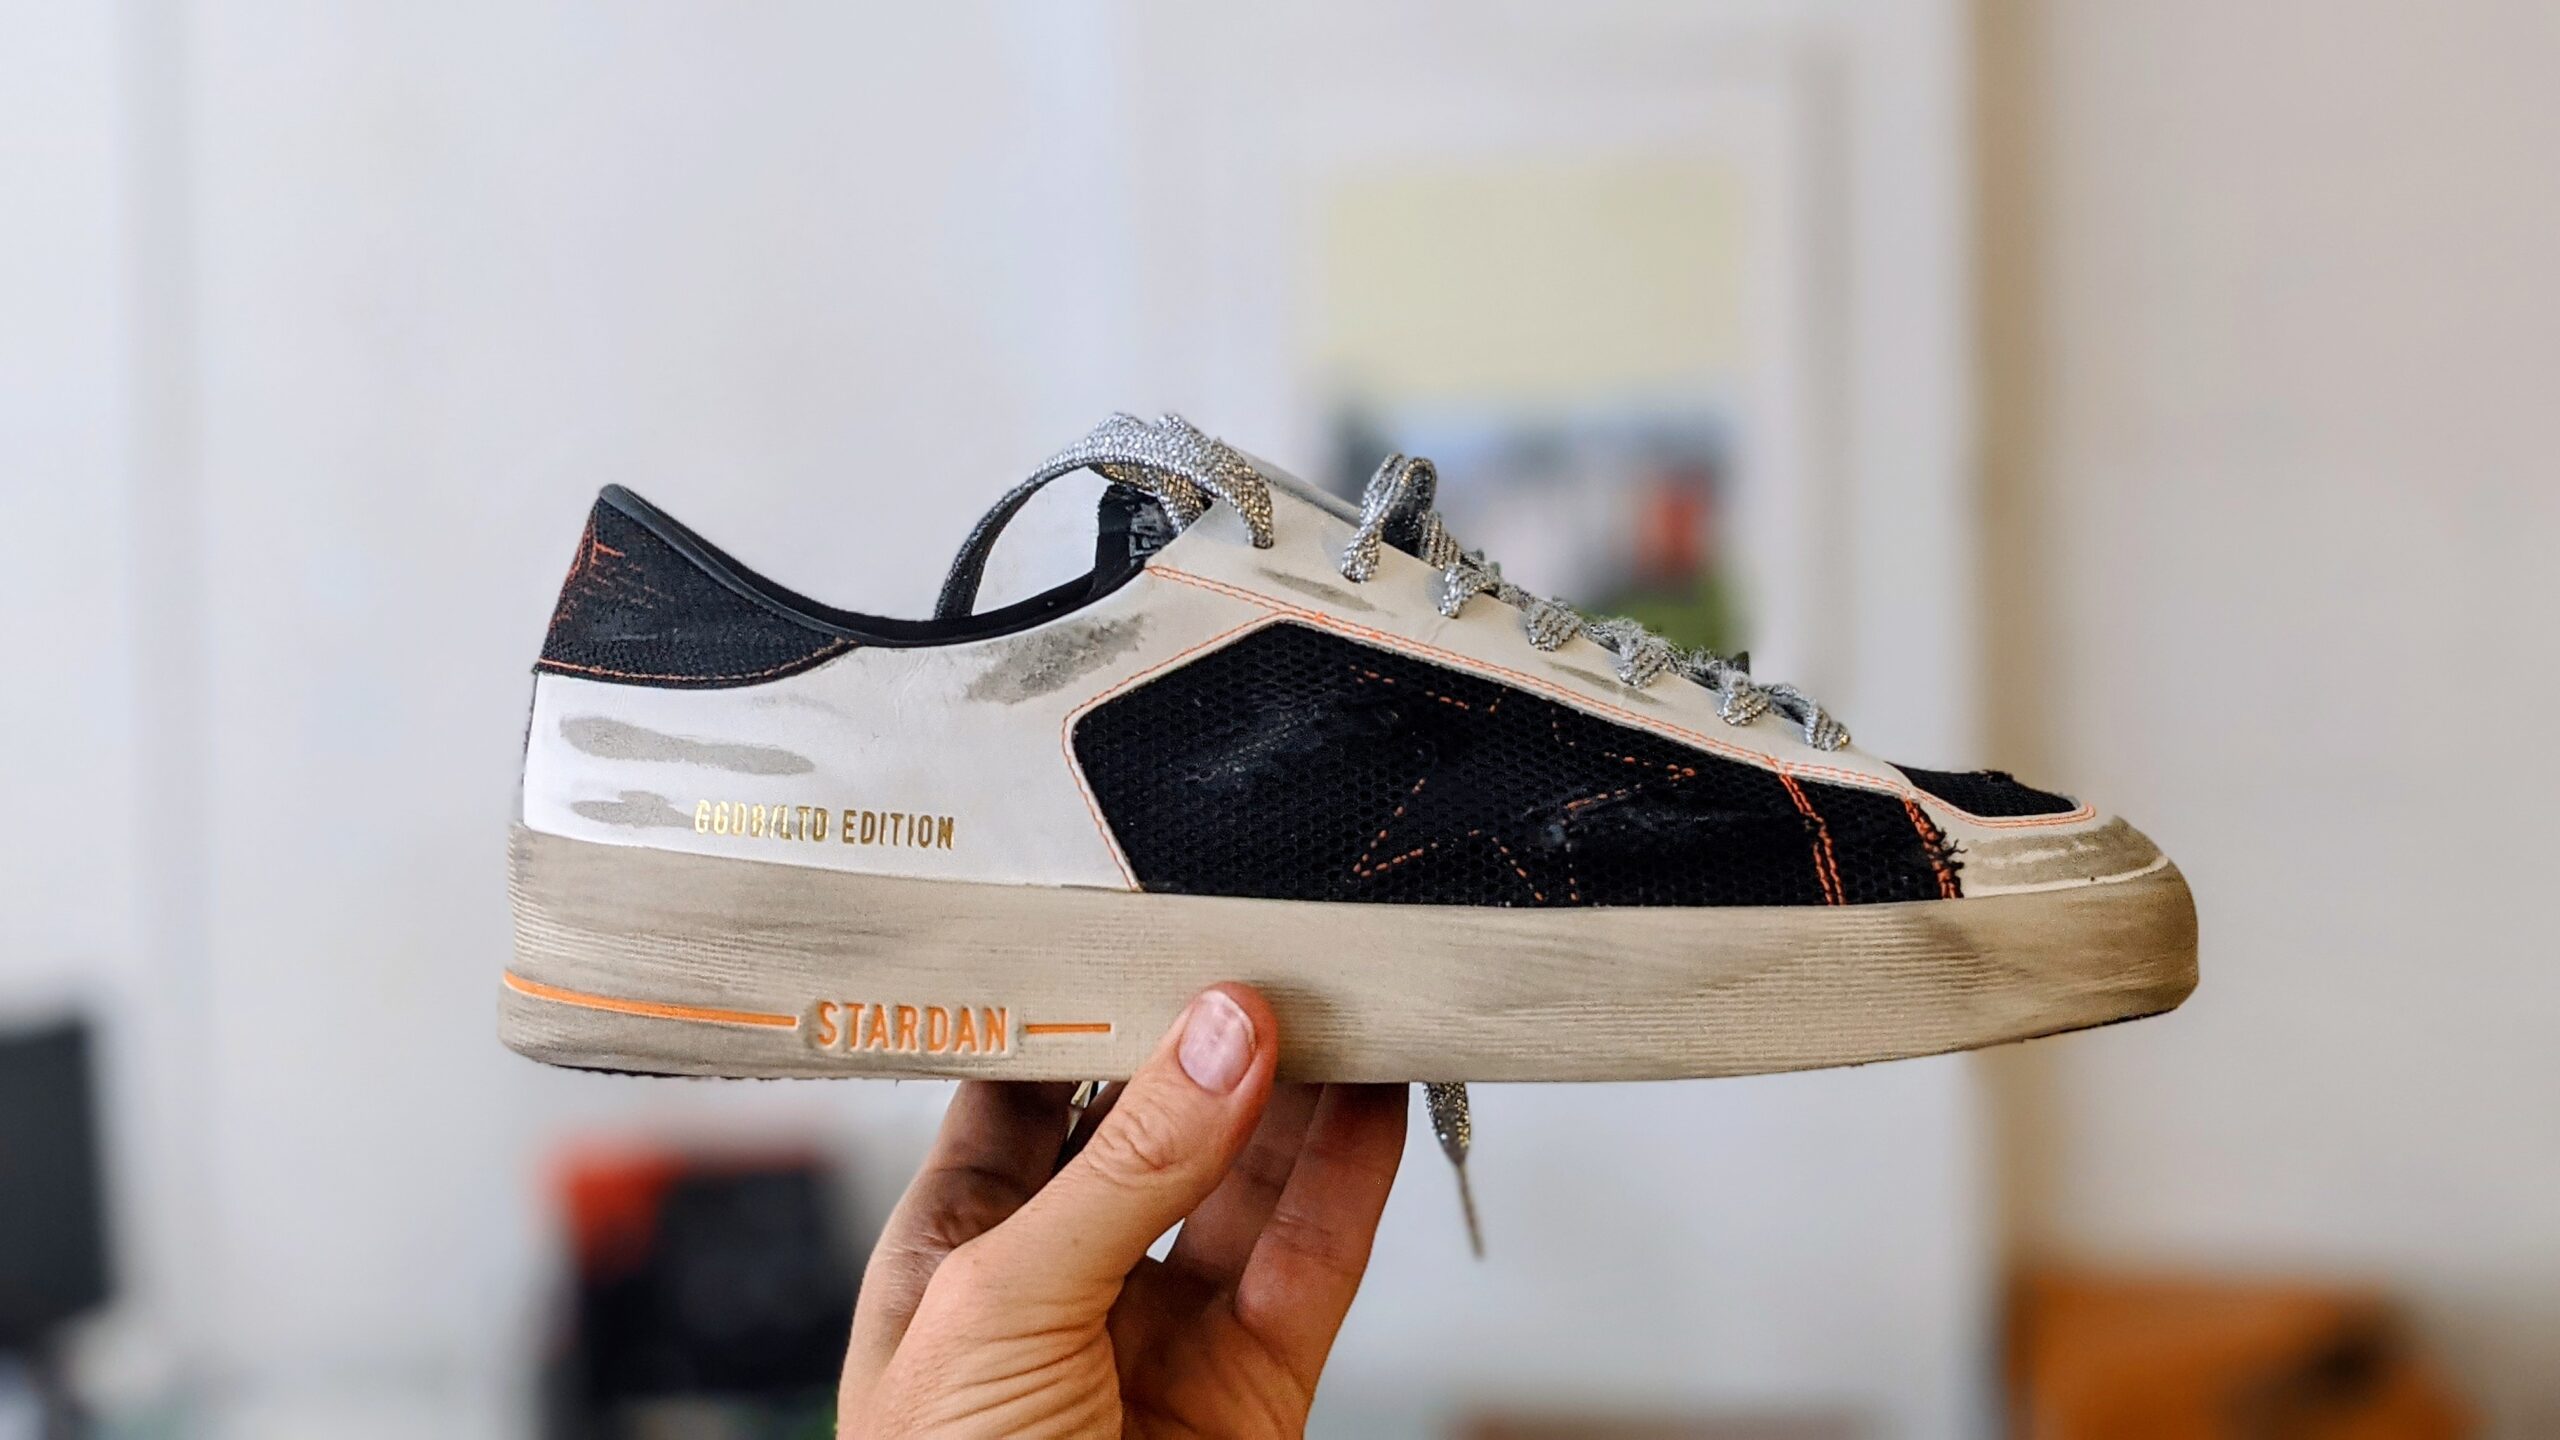 ‘Abused’ $900 Sneakers The Next Normal For Australian Luxury Consumers